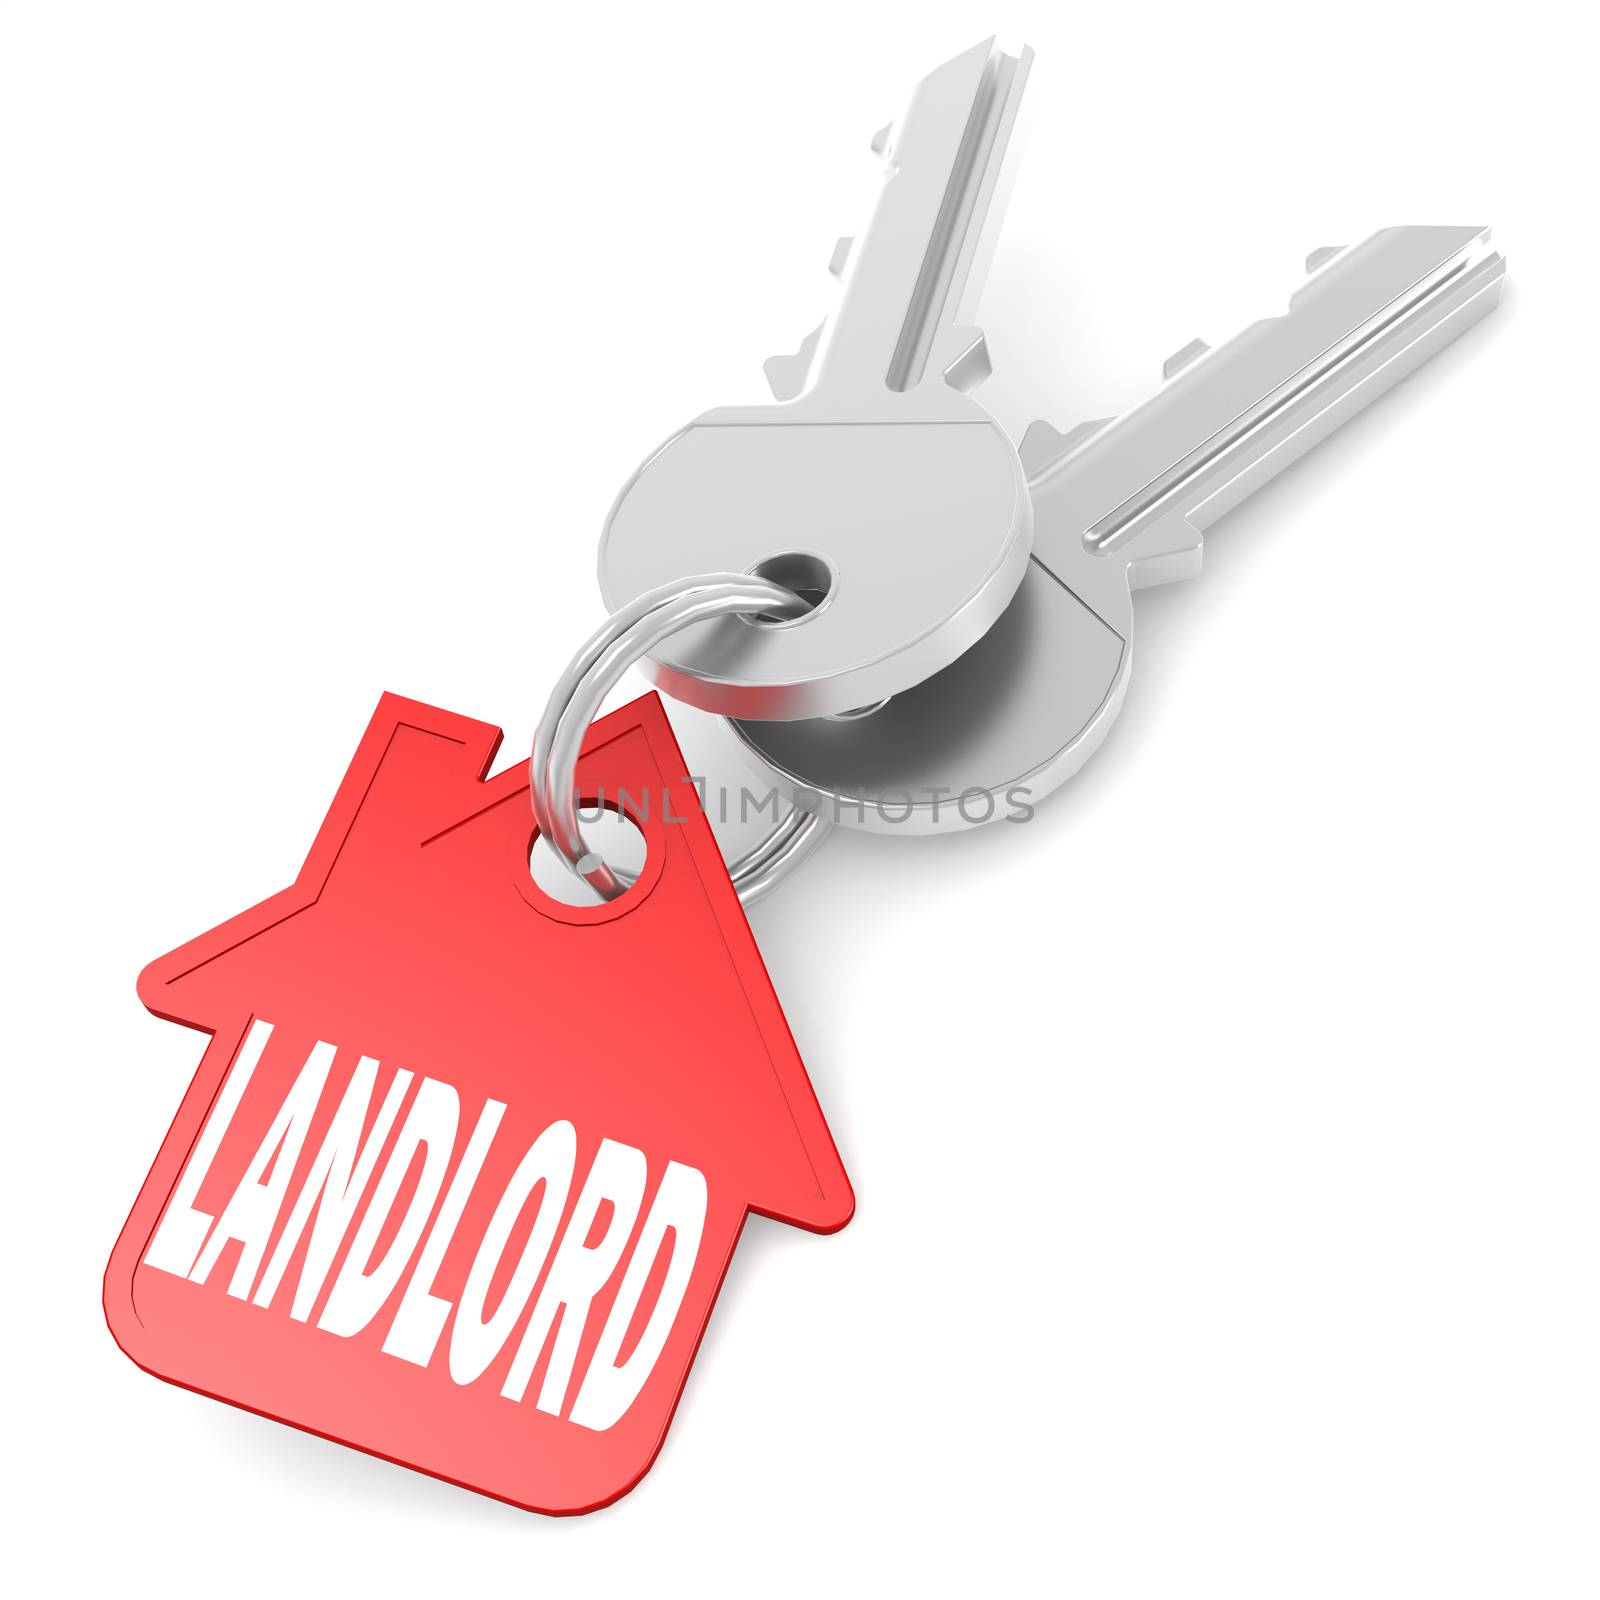 Keychain with landlord word image by tang90246